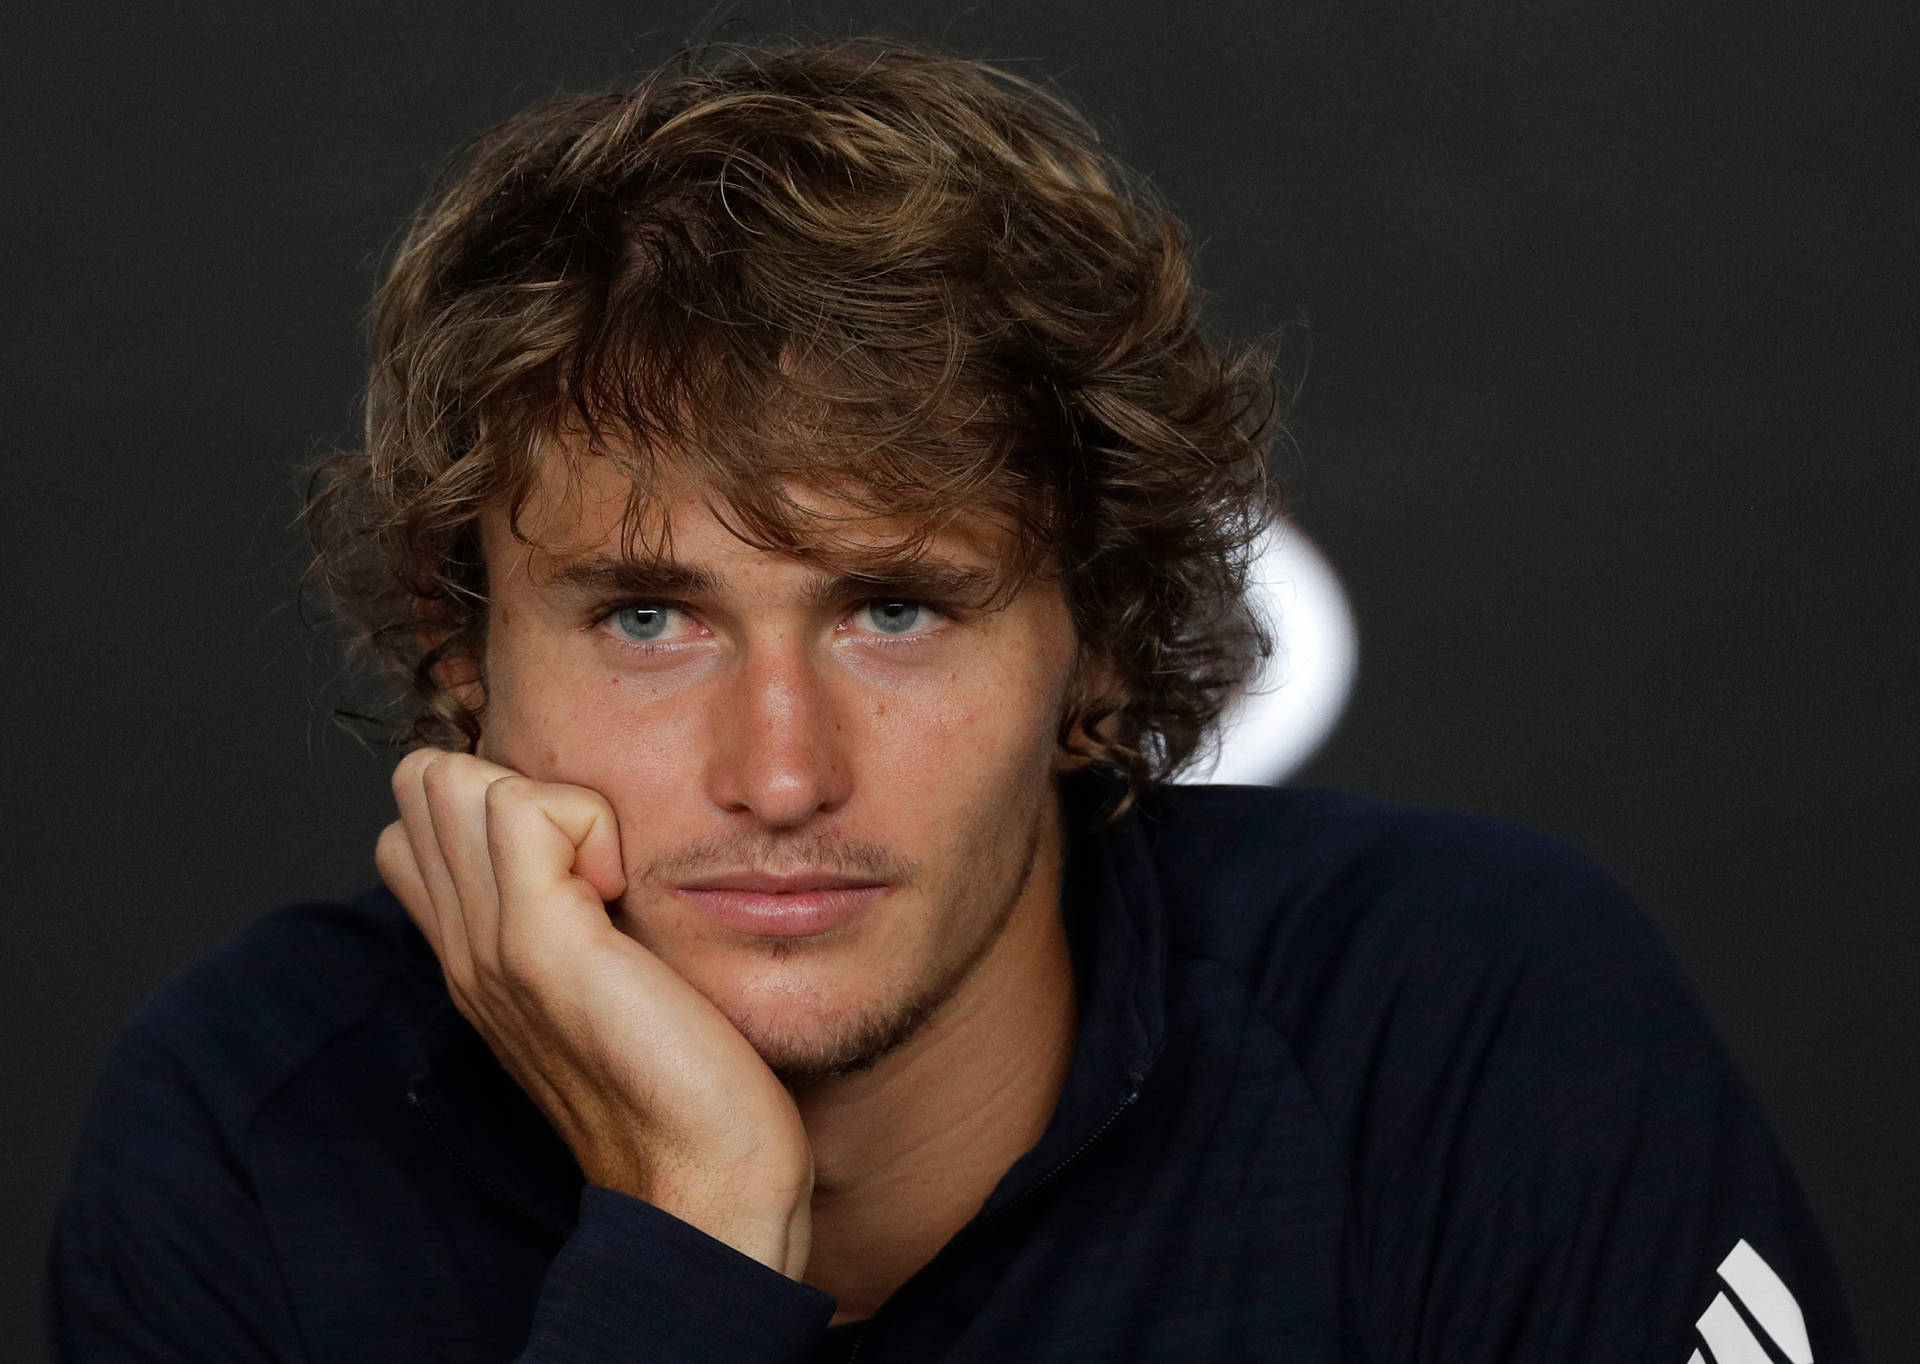 Post-game Interview Session With Alexander Zverev Background